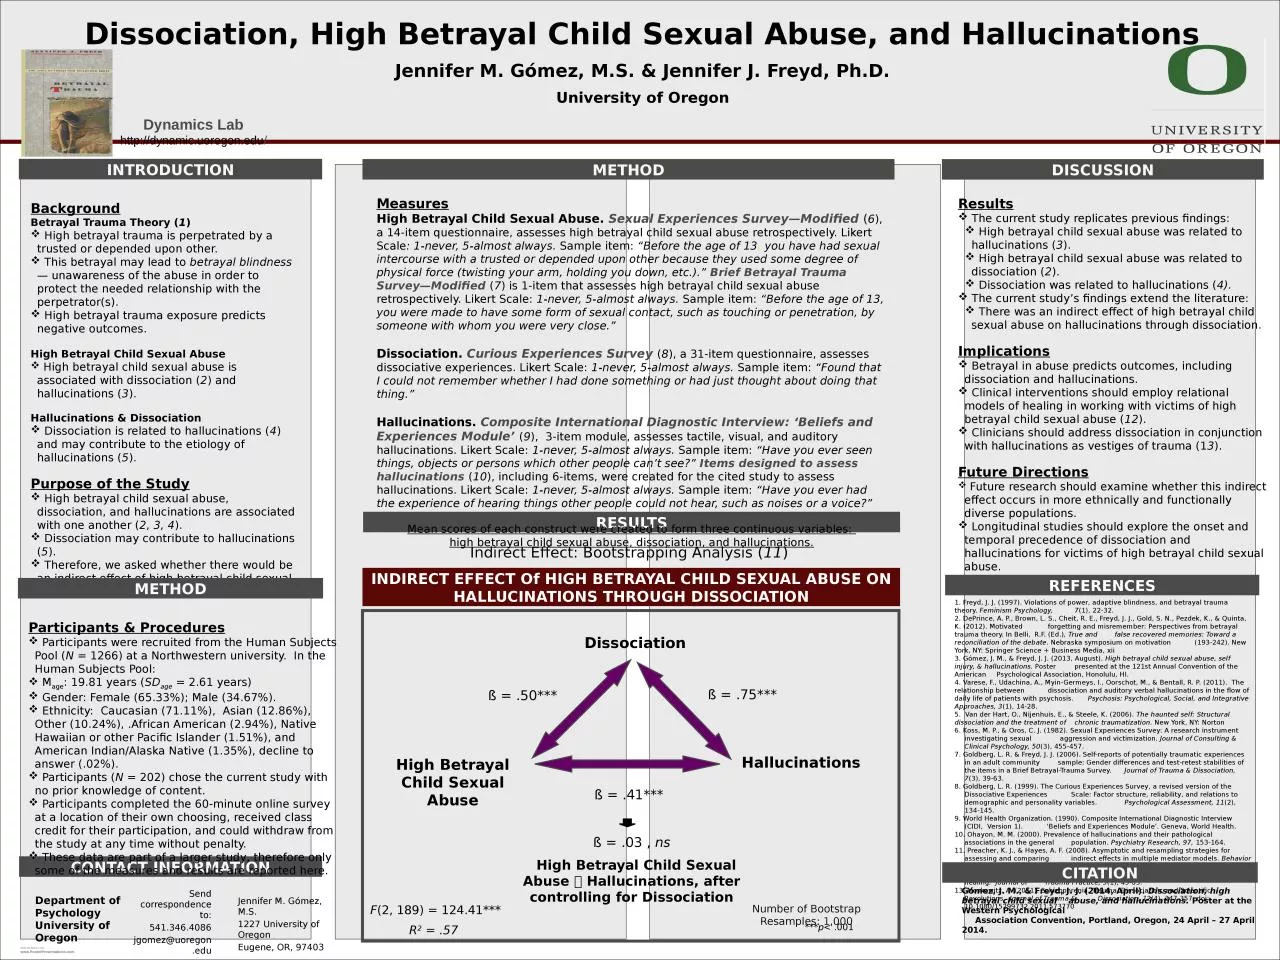 Dissociation, High Betrayal Child Sexual Abuse, and Hallucinations